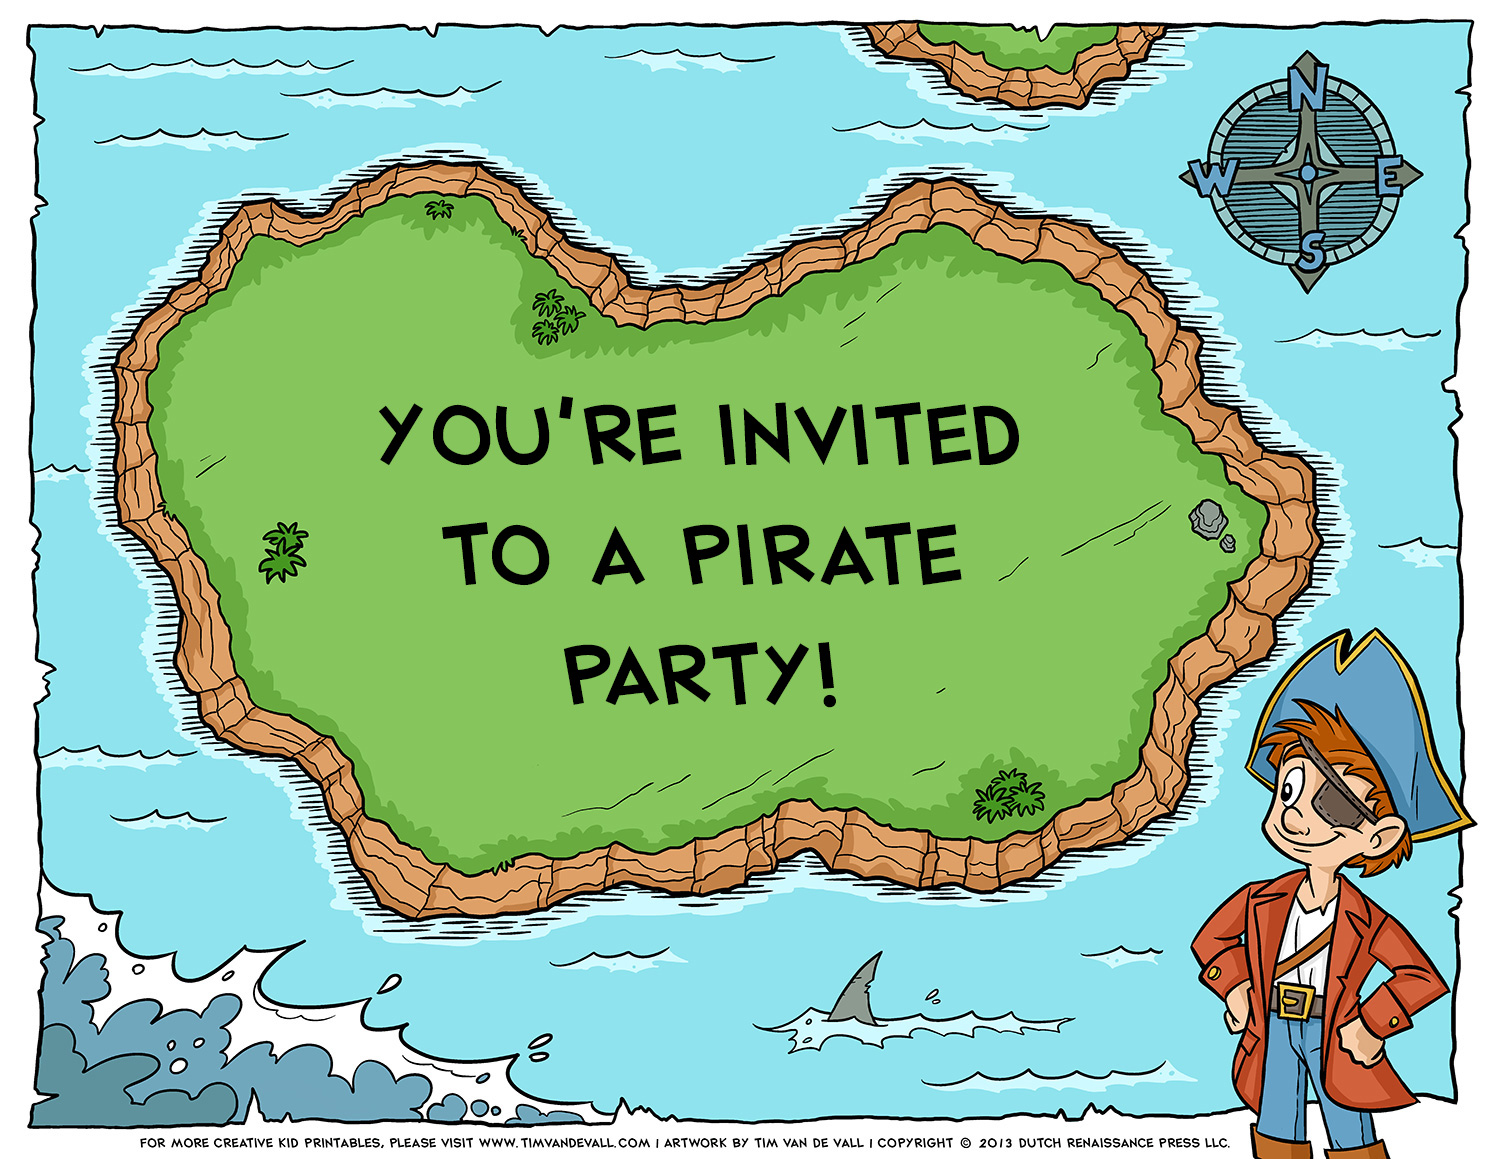 Free Pirate Treasure Maps And Party Favors For A Pirate Birthday Party